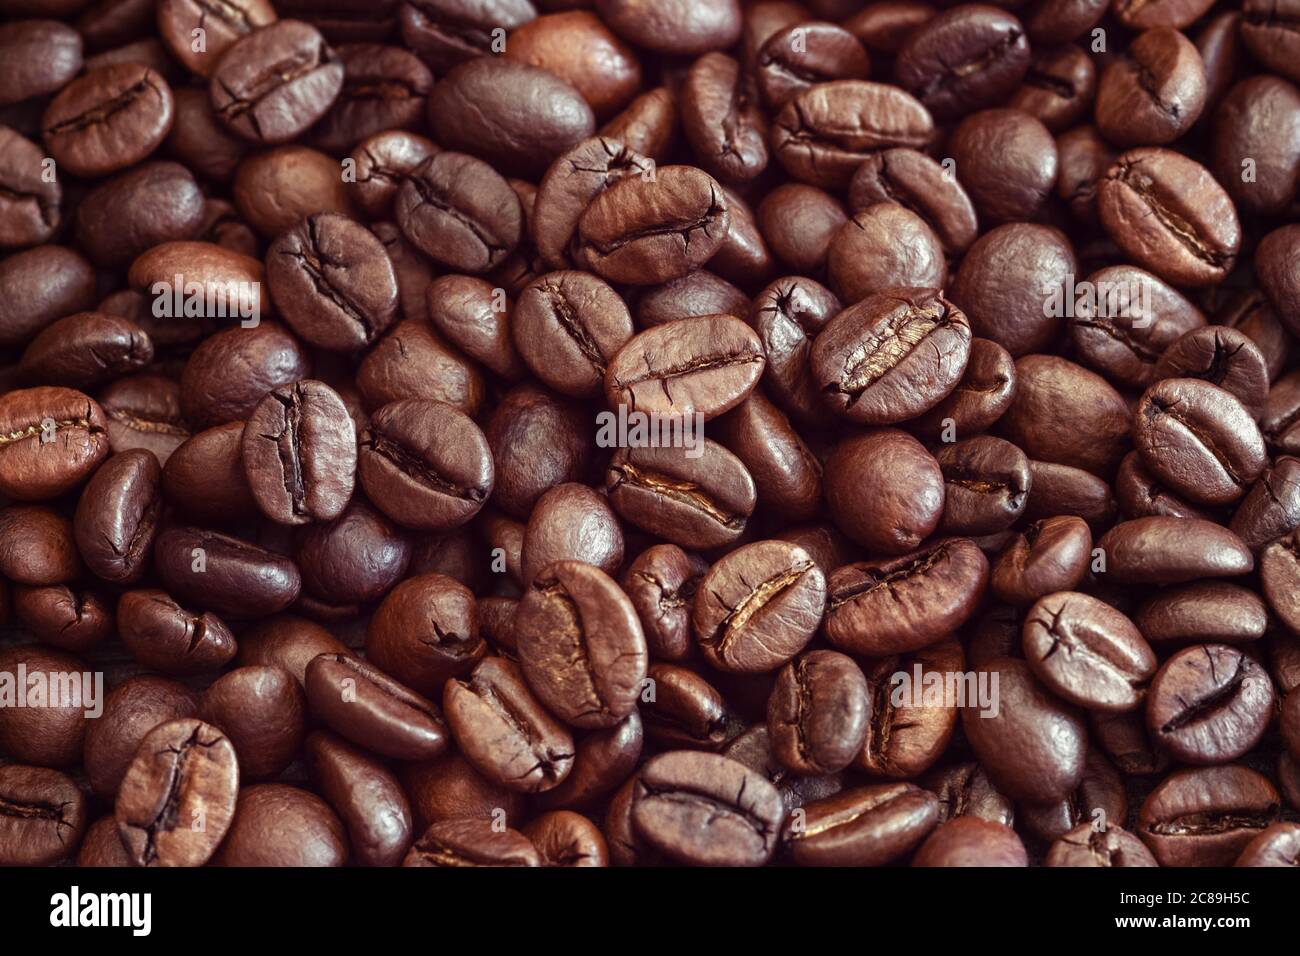 arabica coffee beans brown background Stock Photo